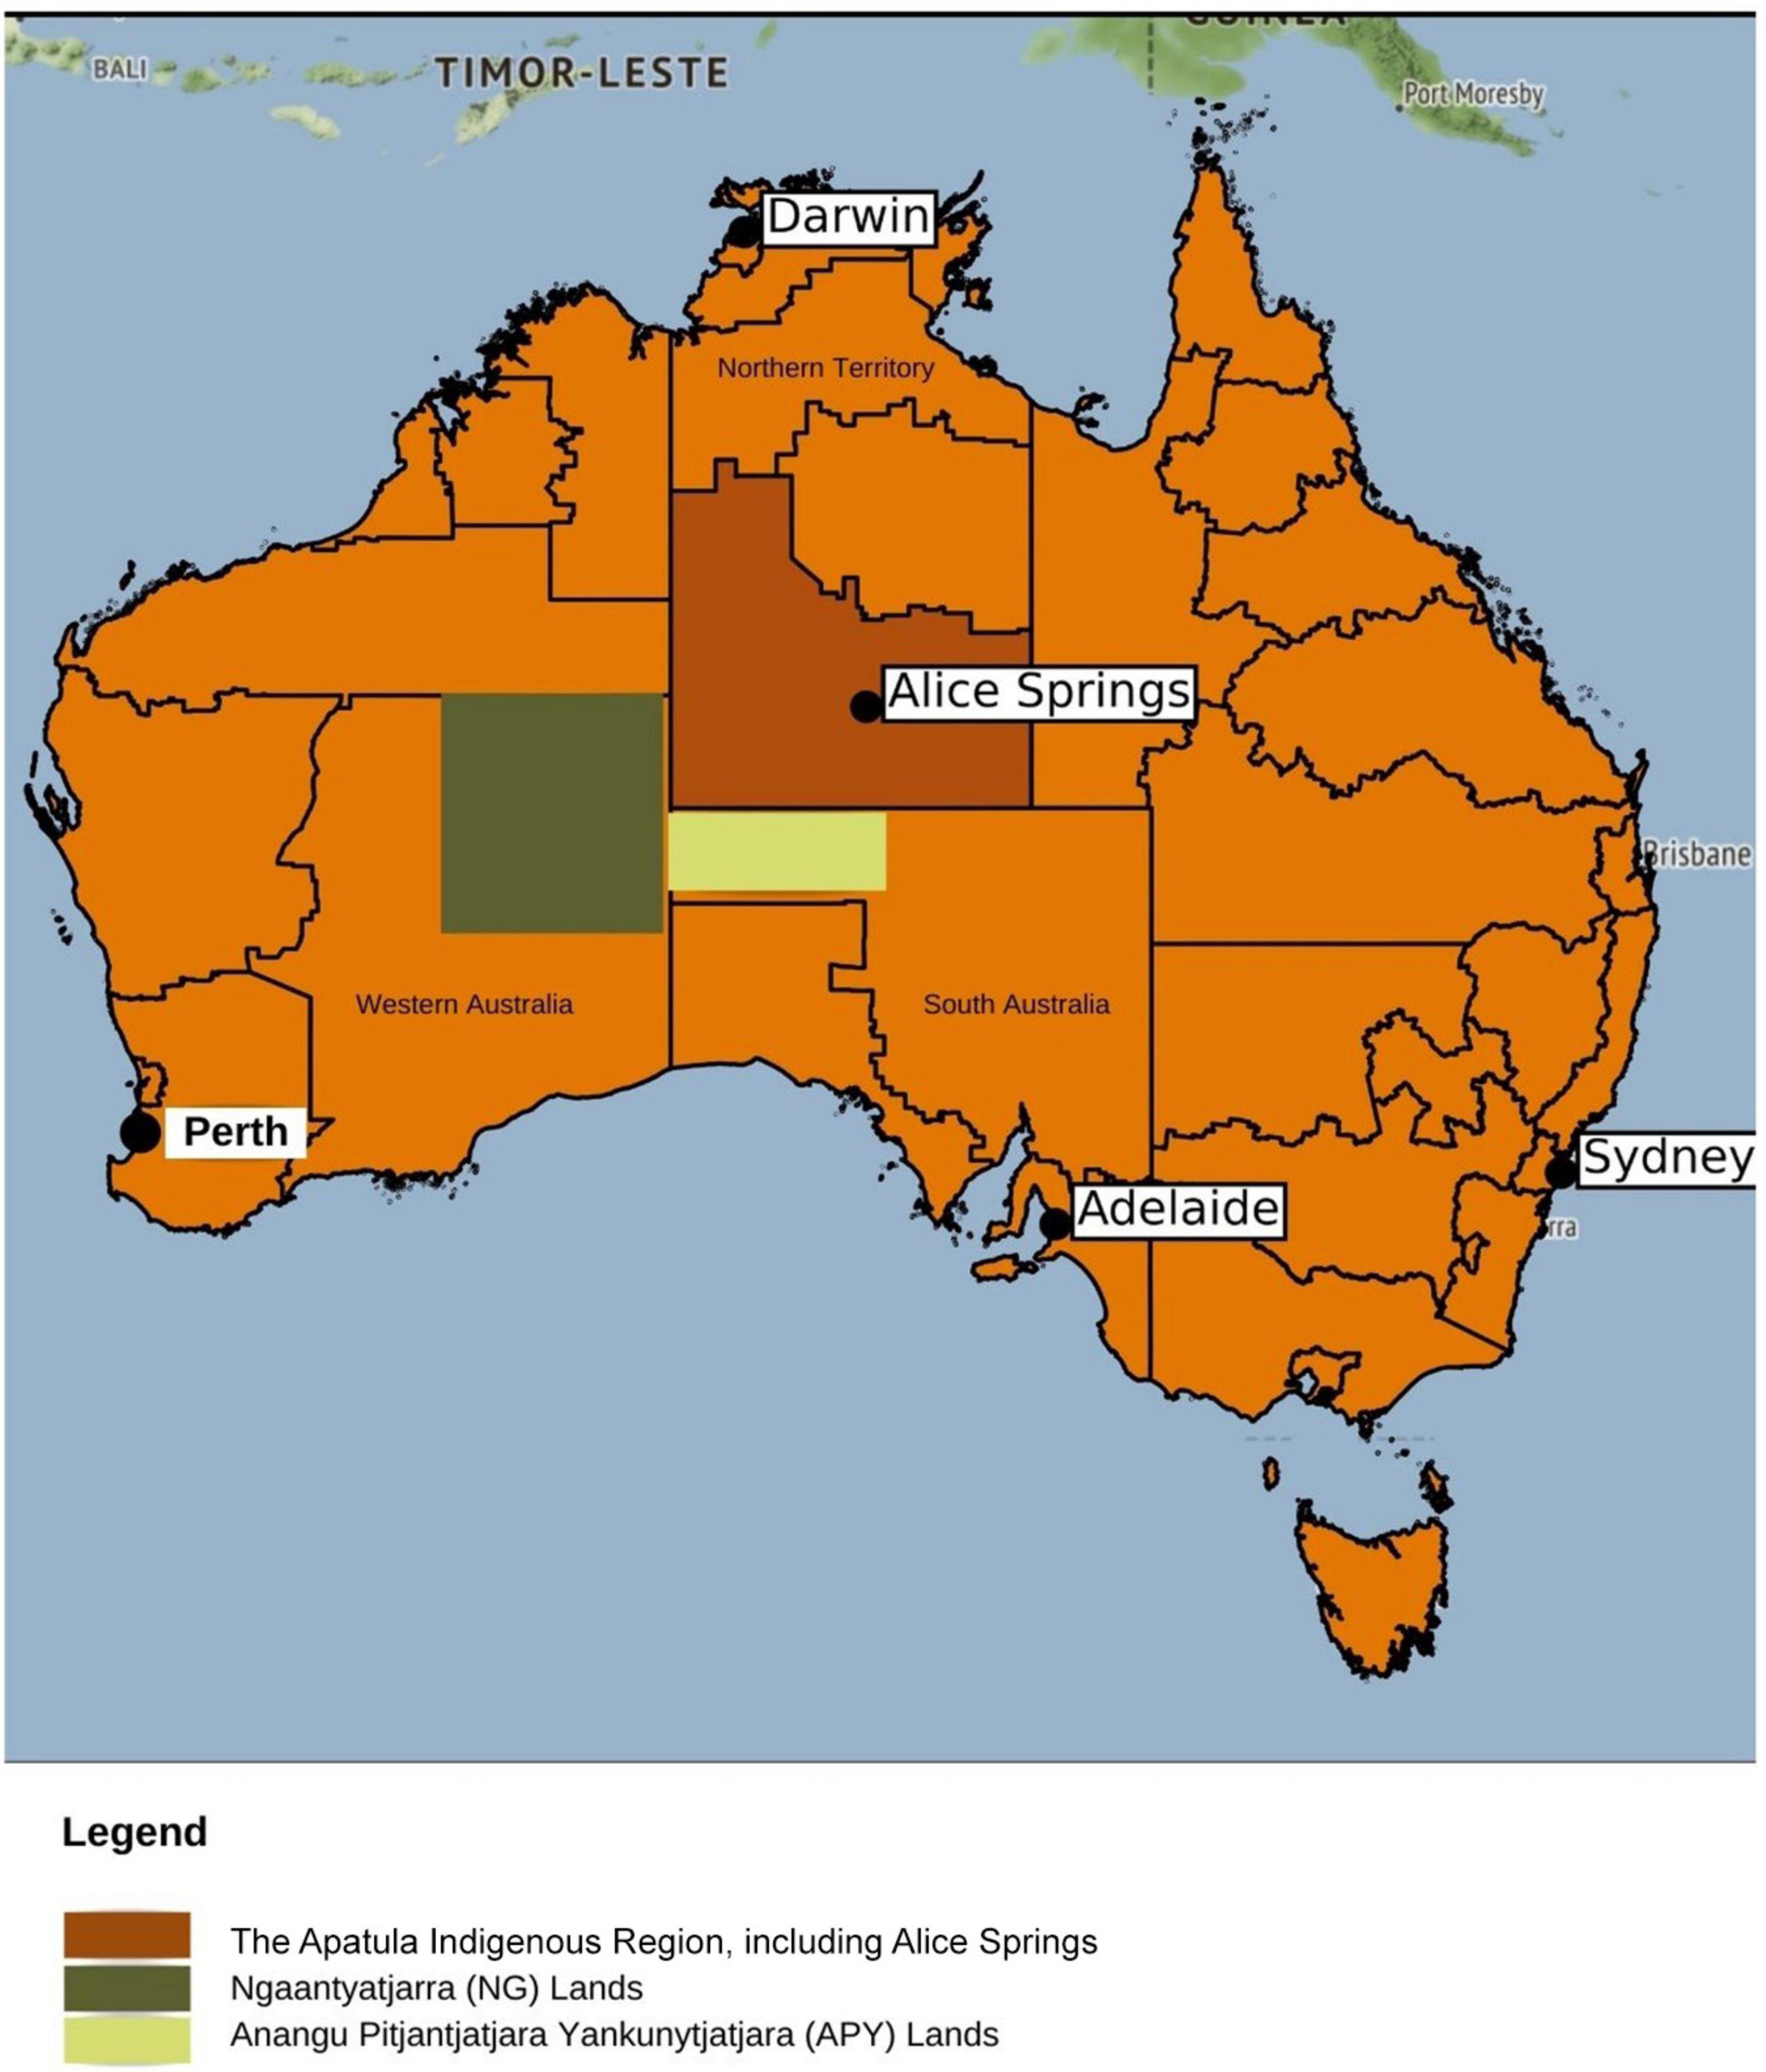 Frontiers A Qualitative Study Exploring Perceptions to the Human T Cell Leukaemia Virus Type 1 in Central Australia Barriers to Preventing Transmission in a Remote Aboriginal Population photo